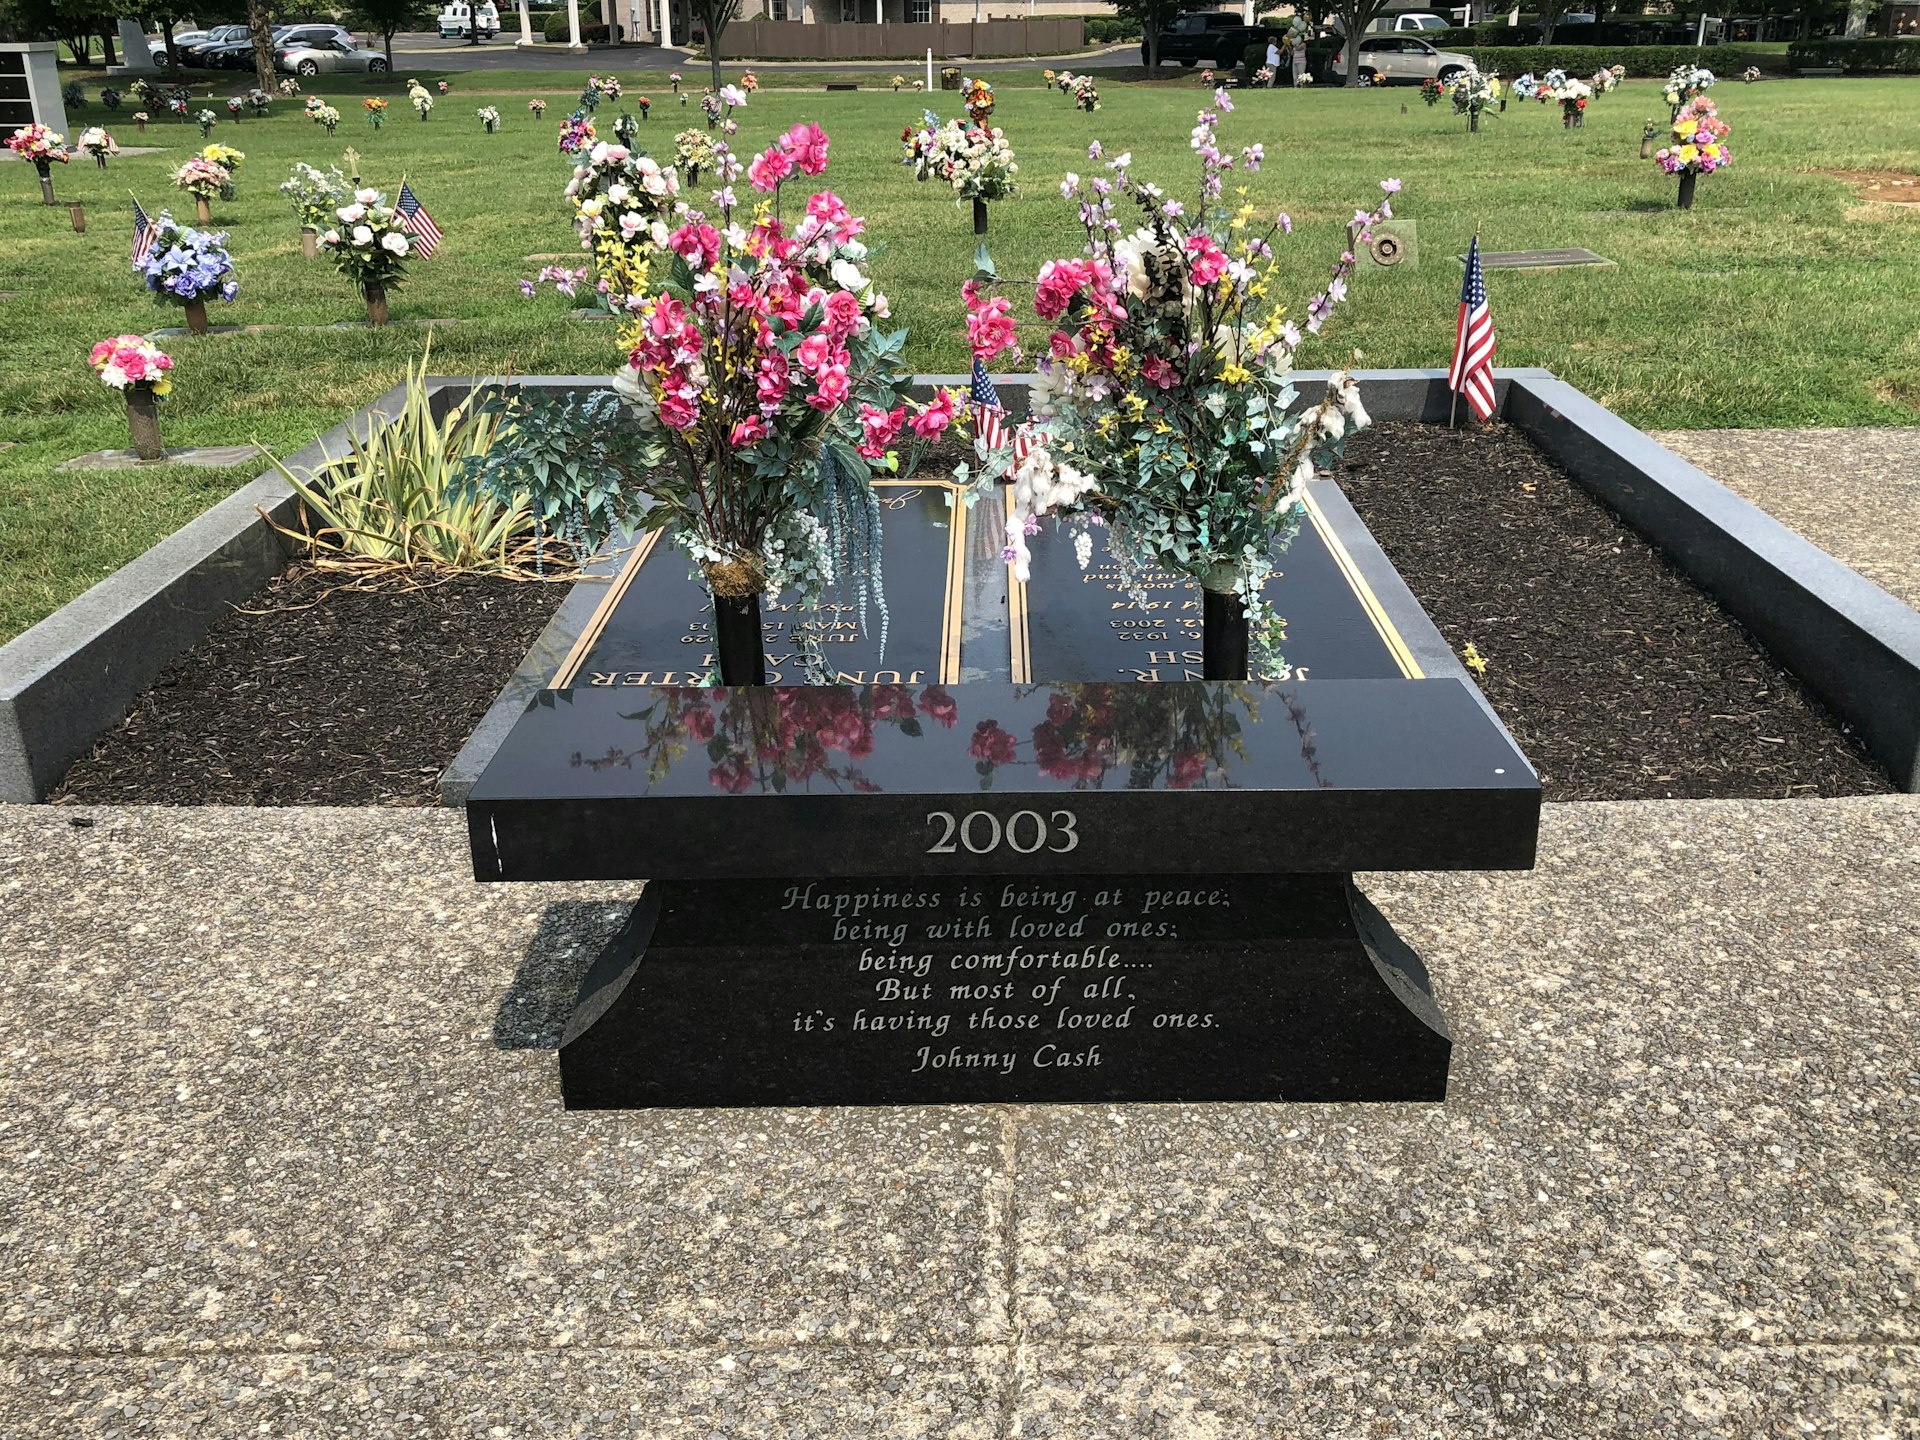 Gravesites of Johnny and June Cash, with memorial bench in front